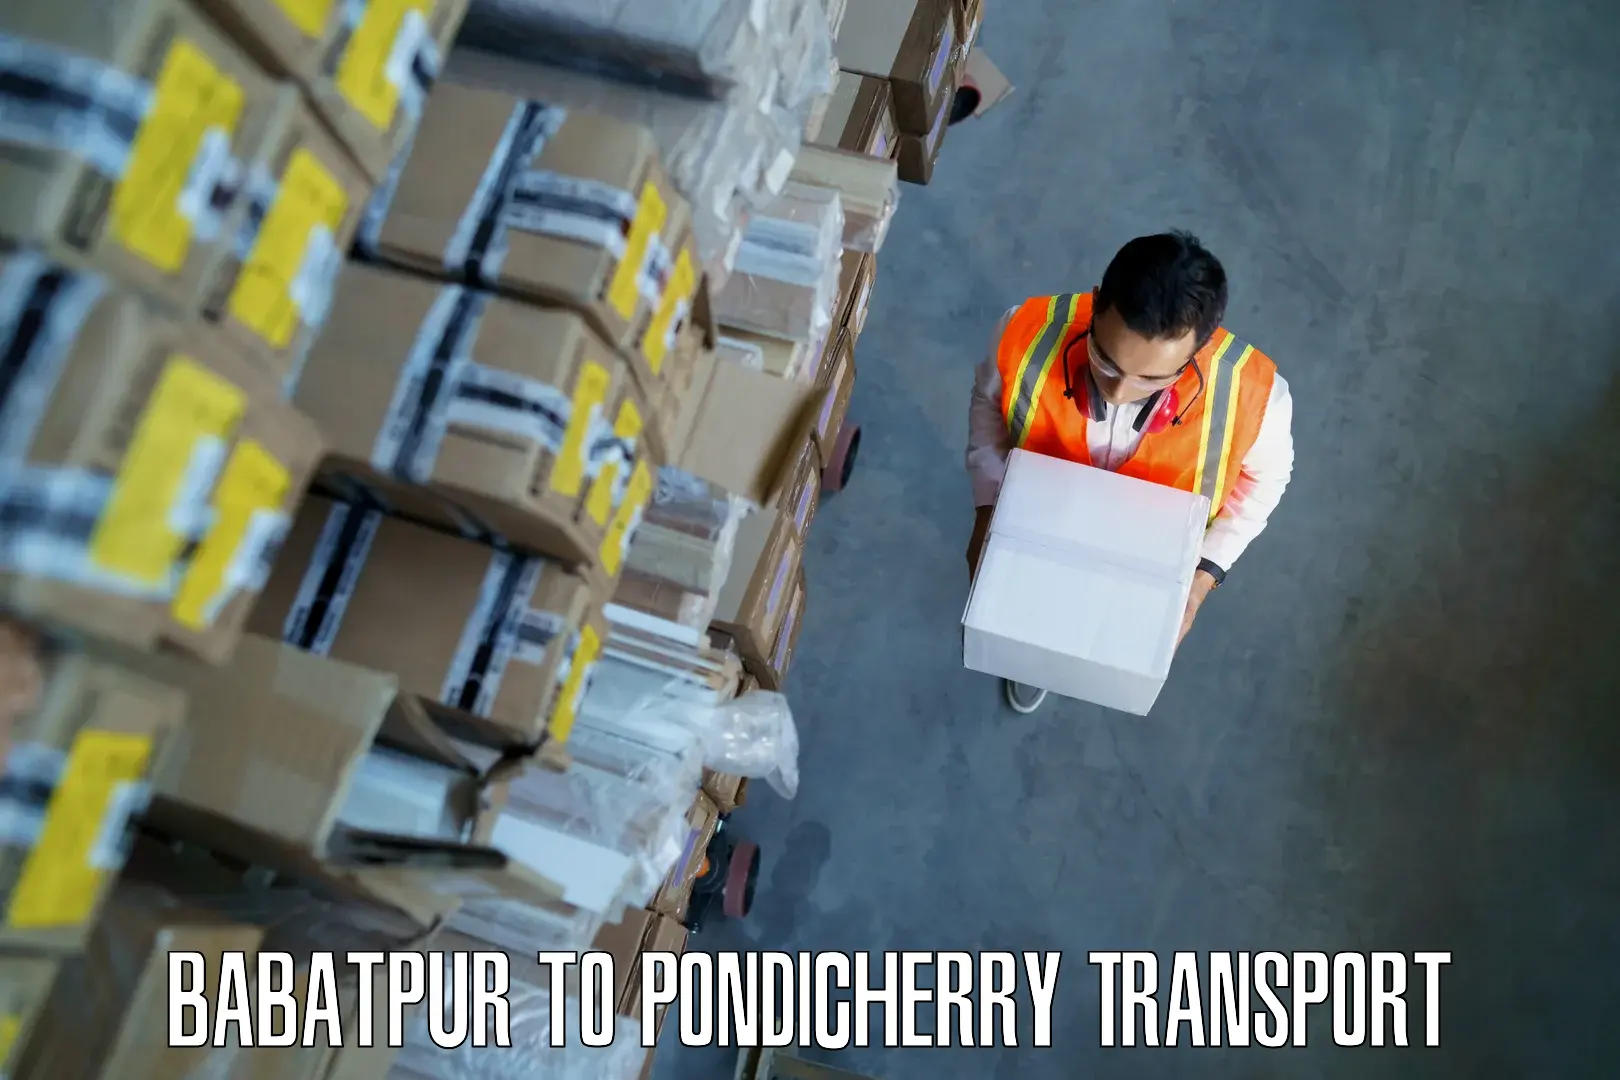 Container transport service Babatpur to Pondicherry